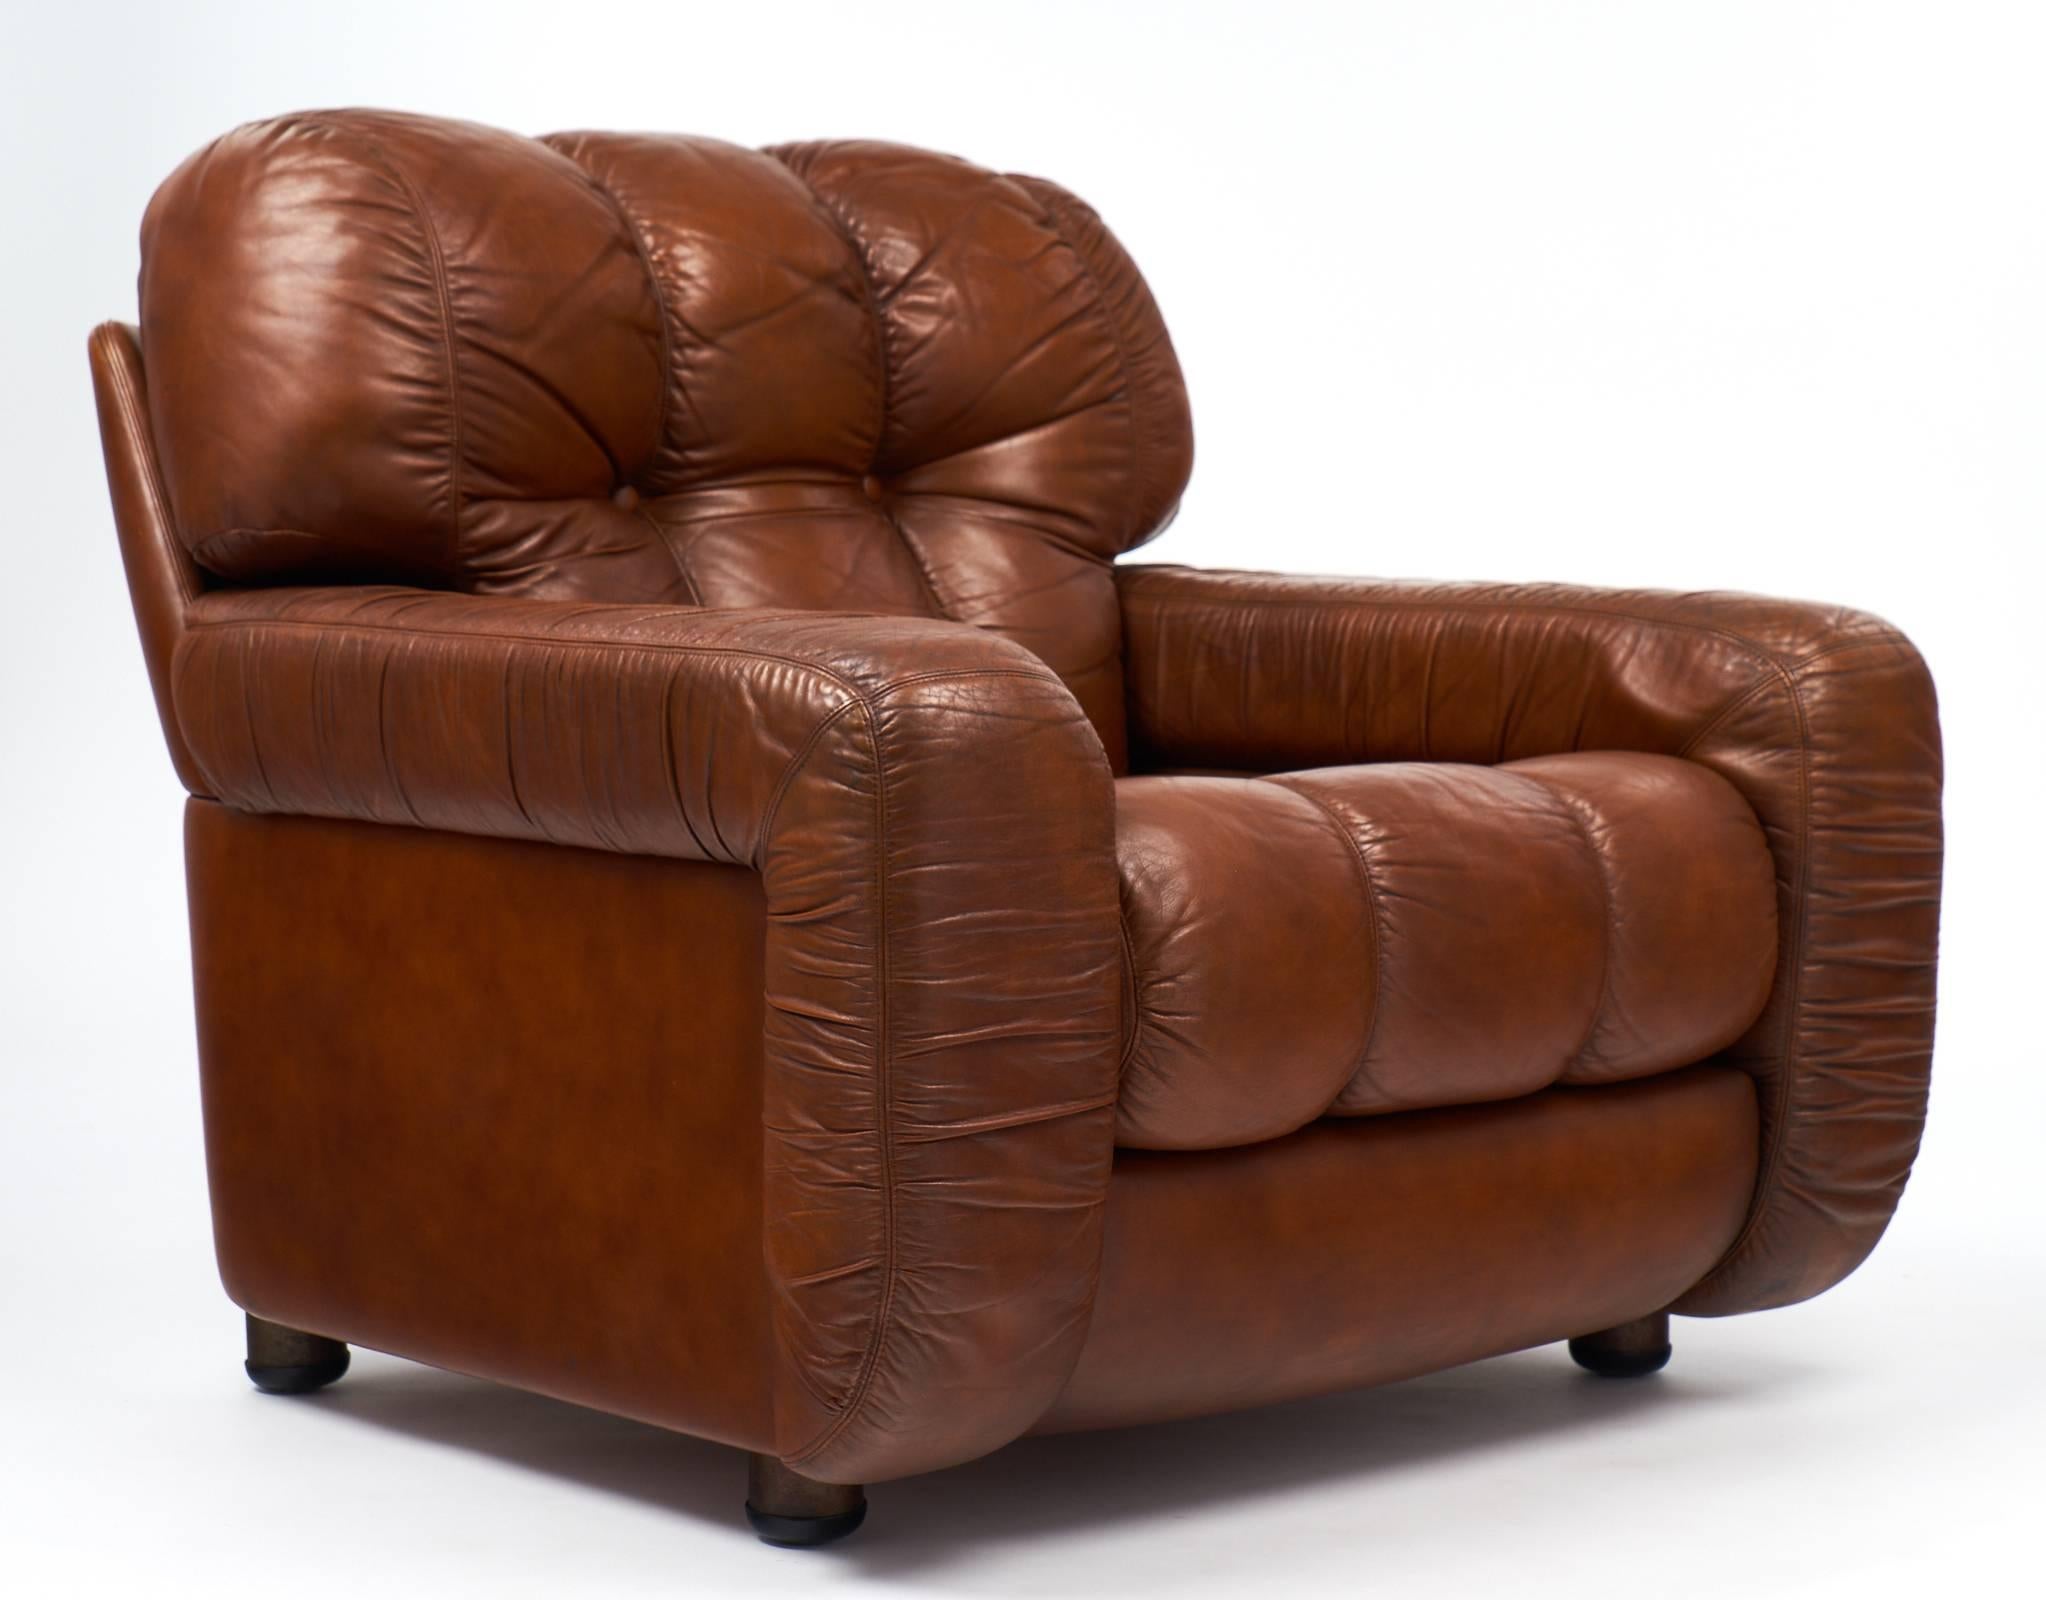 overstuffed leather chairs